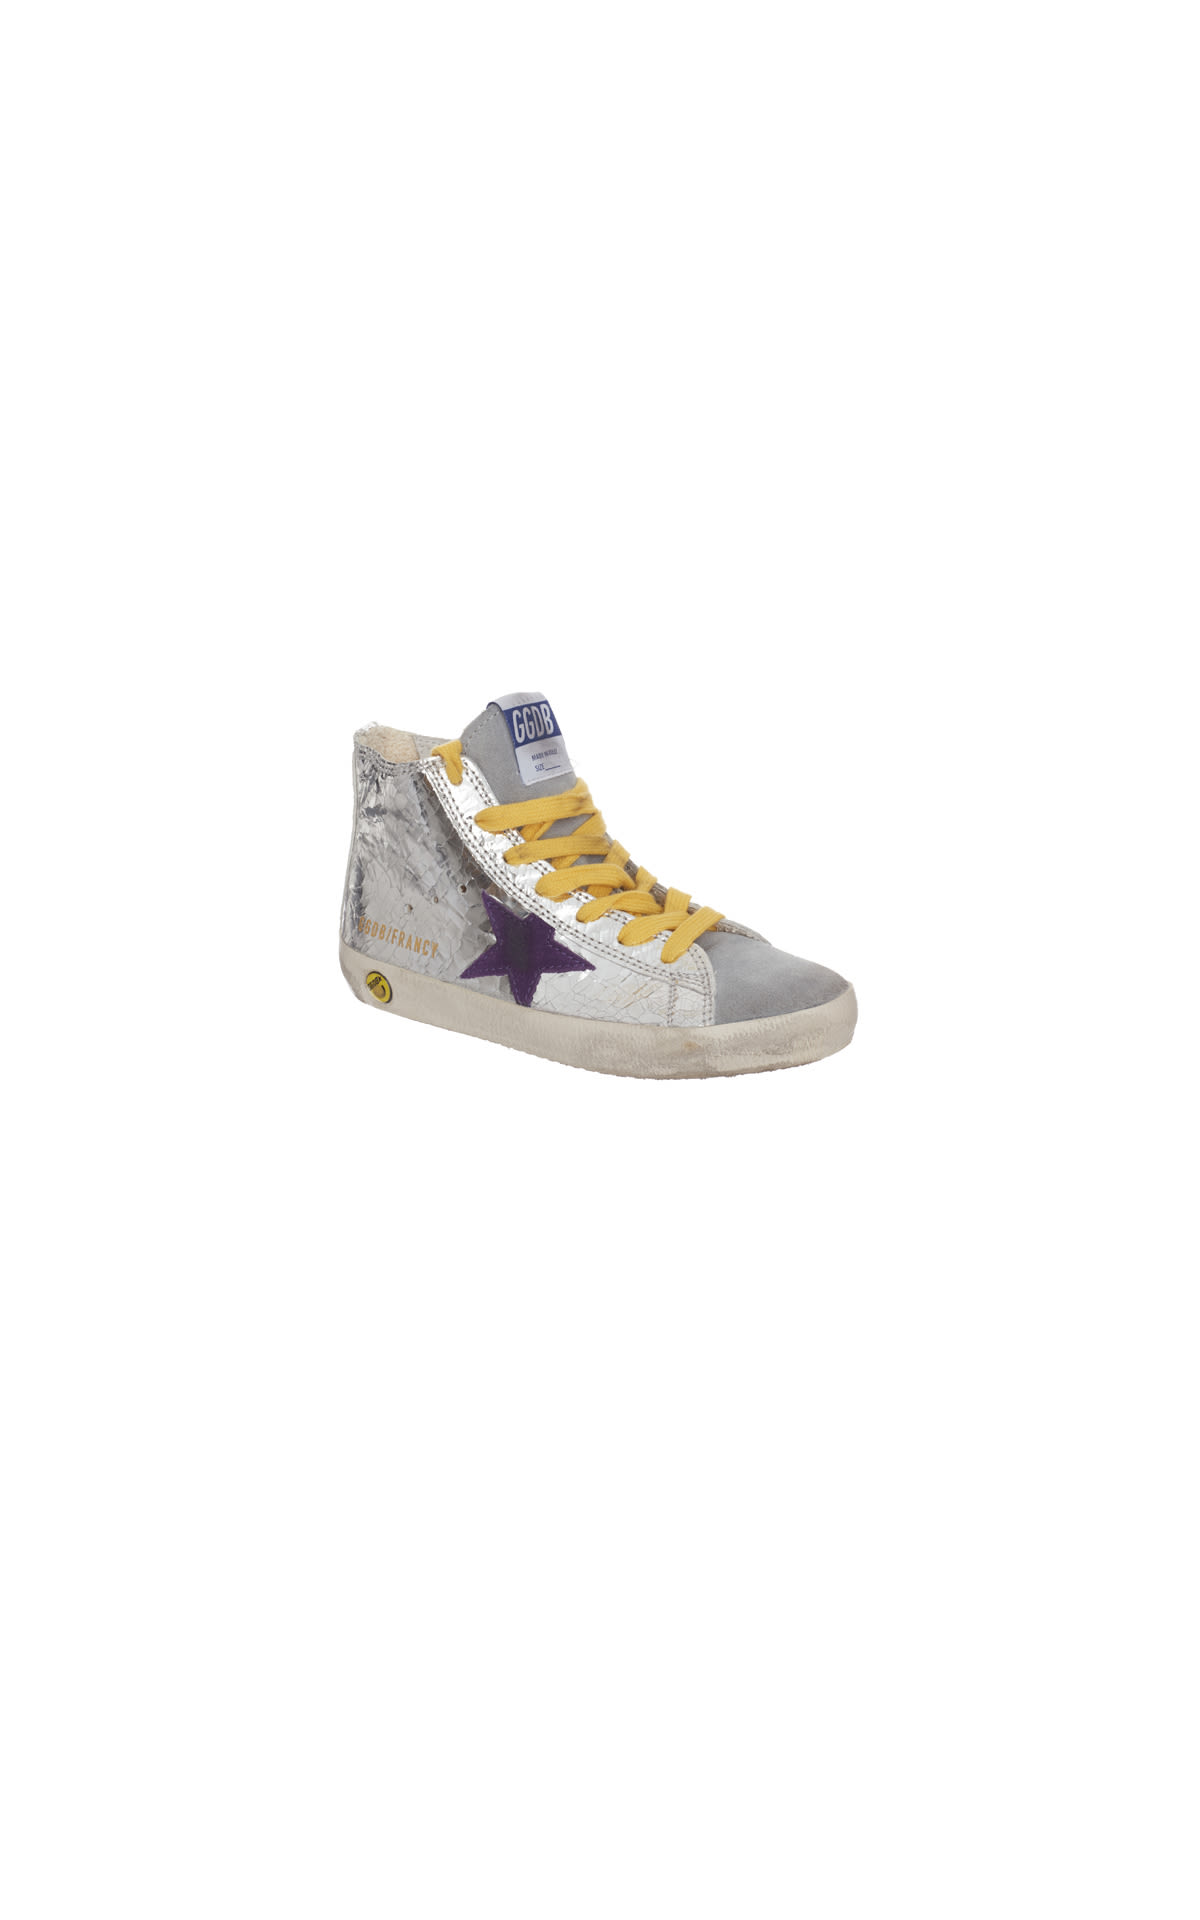 Golden Goose Kids francy silver wall purple star trainer from Bicester Village